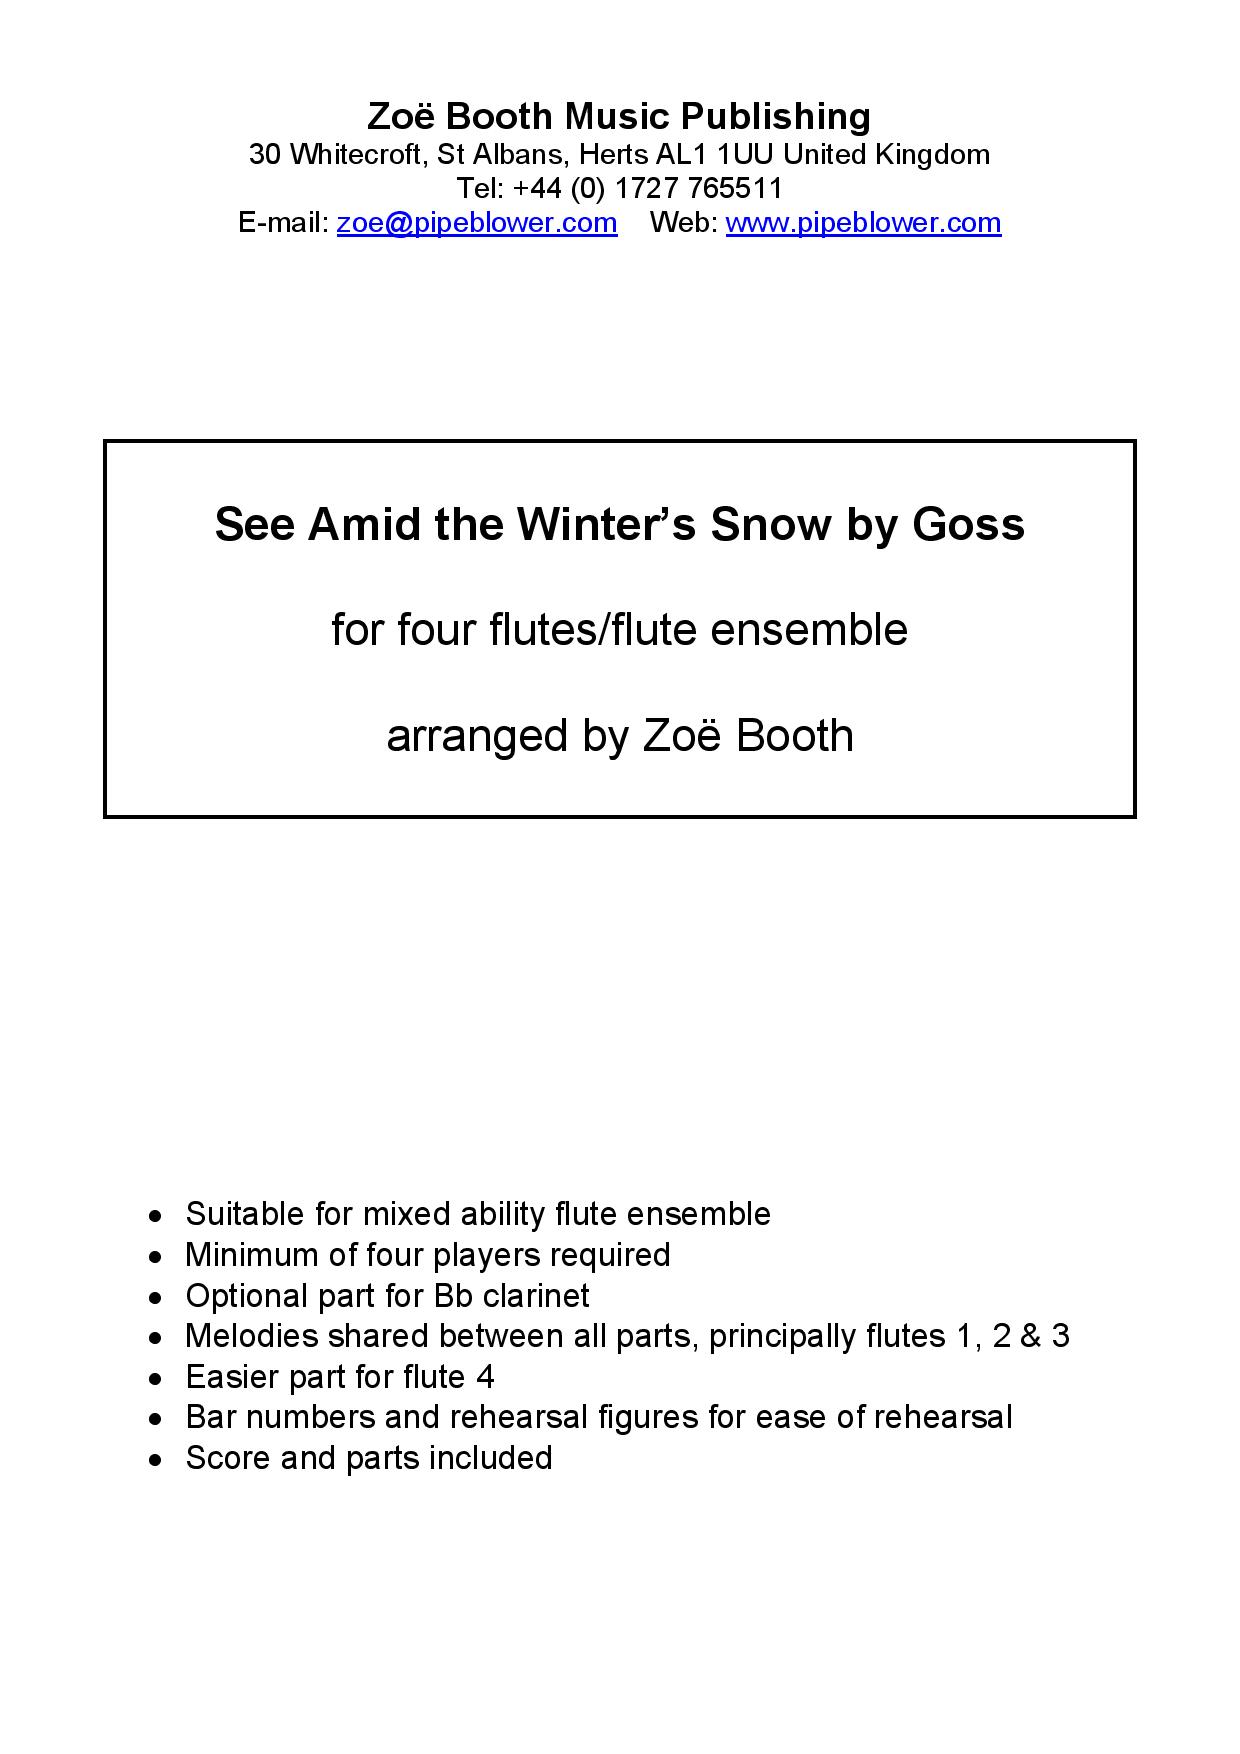 See Amid the Winter’s Snow by John Goss,  arranged by Zoë Booth for four or more flutes/flute choir